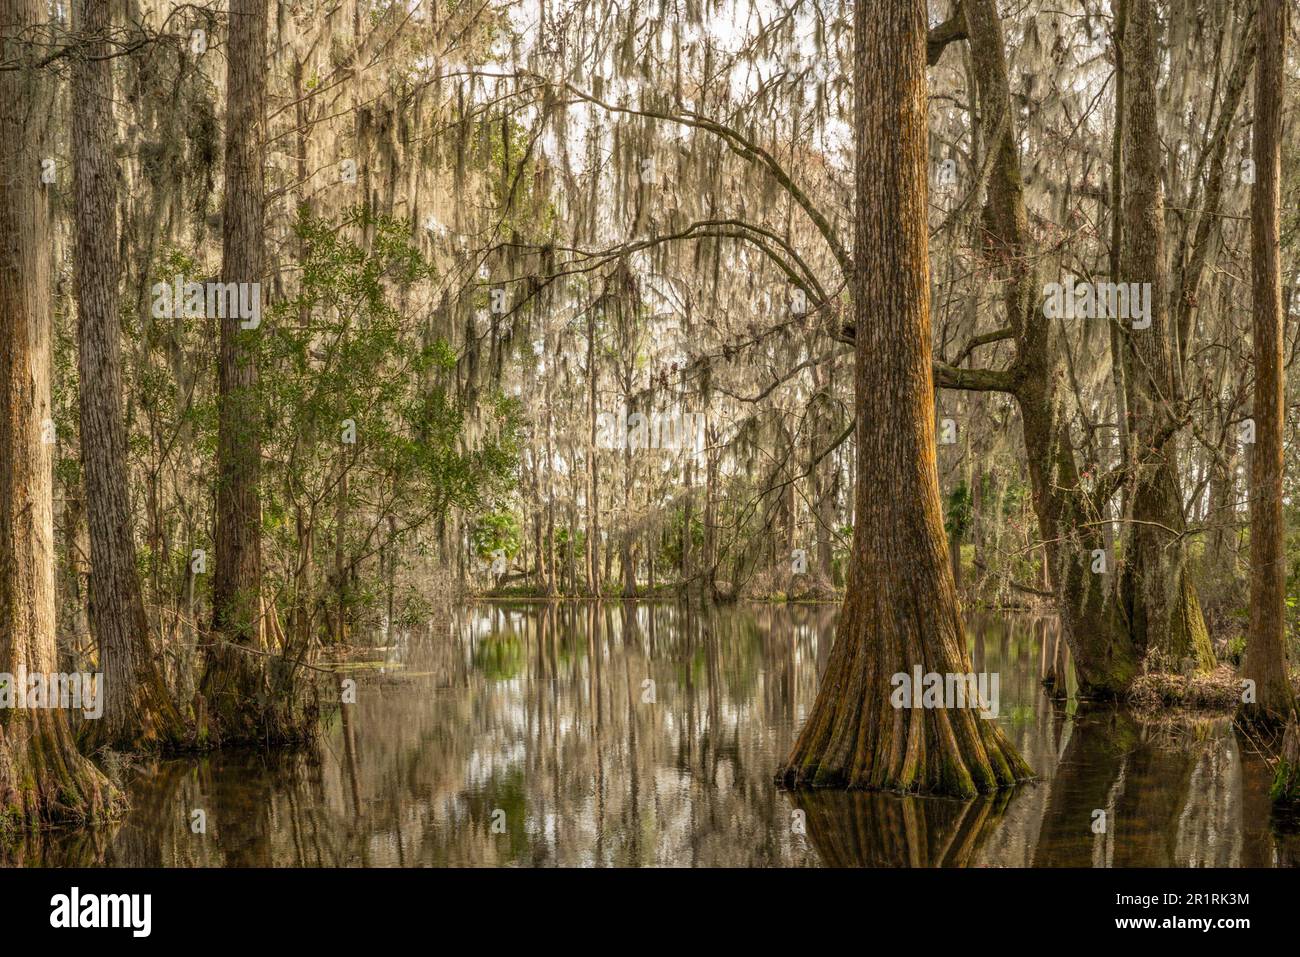 Peaceful image of low country South Carolina Cypress Swamp with Spanish Moss. Stock Photo